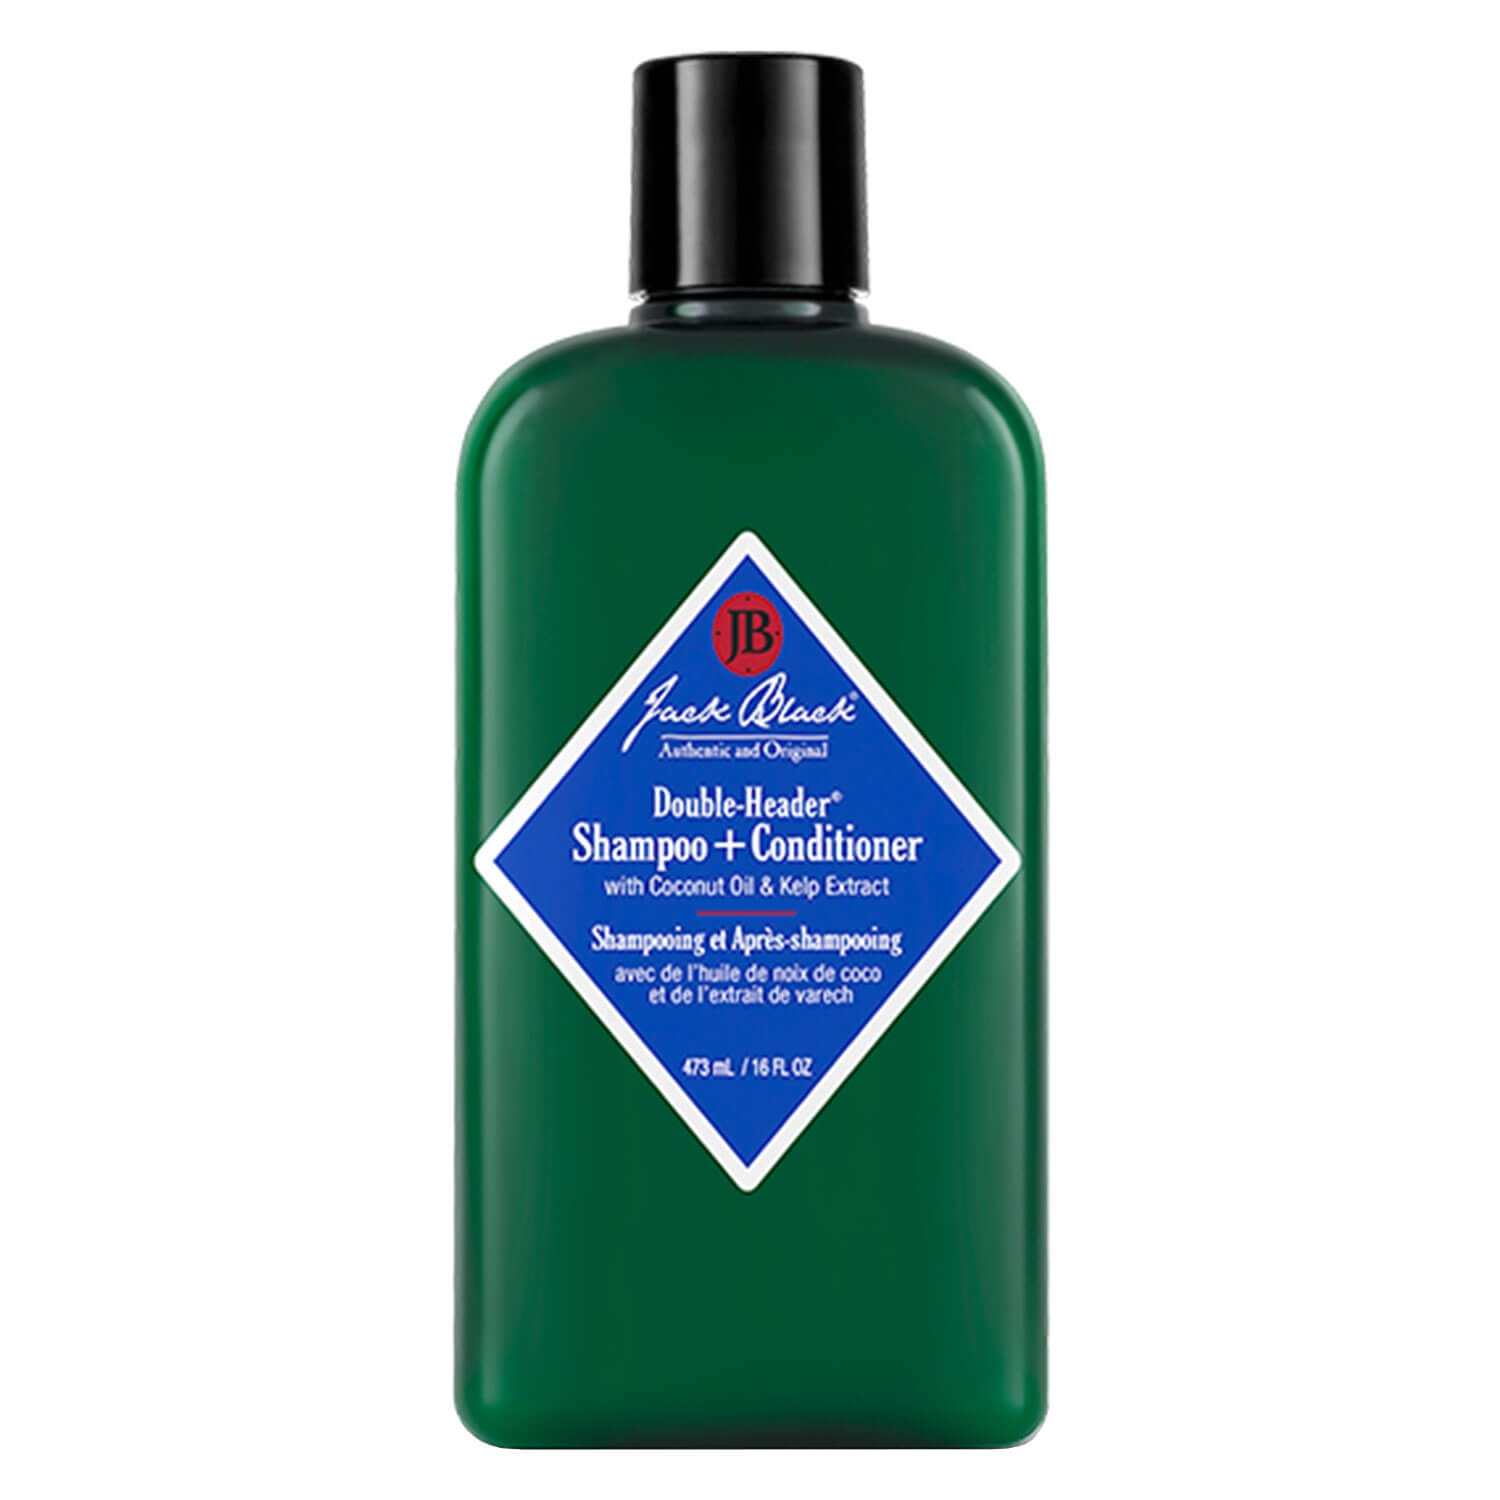 Product image from Jack Black - Double-Header Shampoo + Conditioner